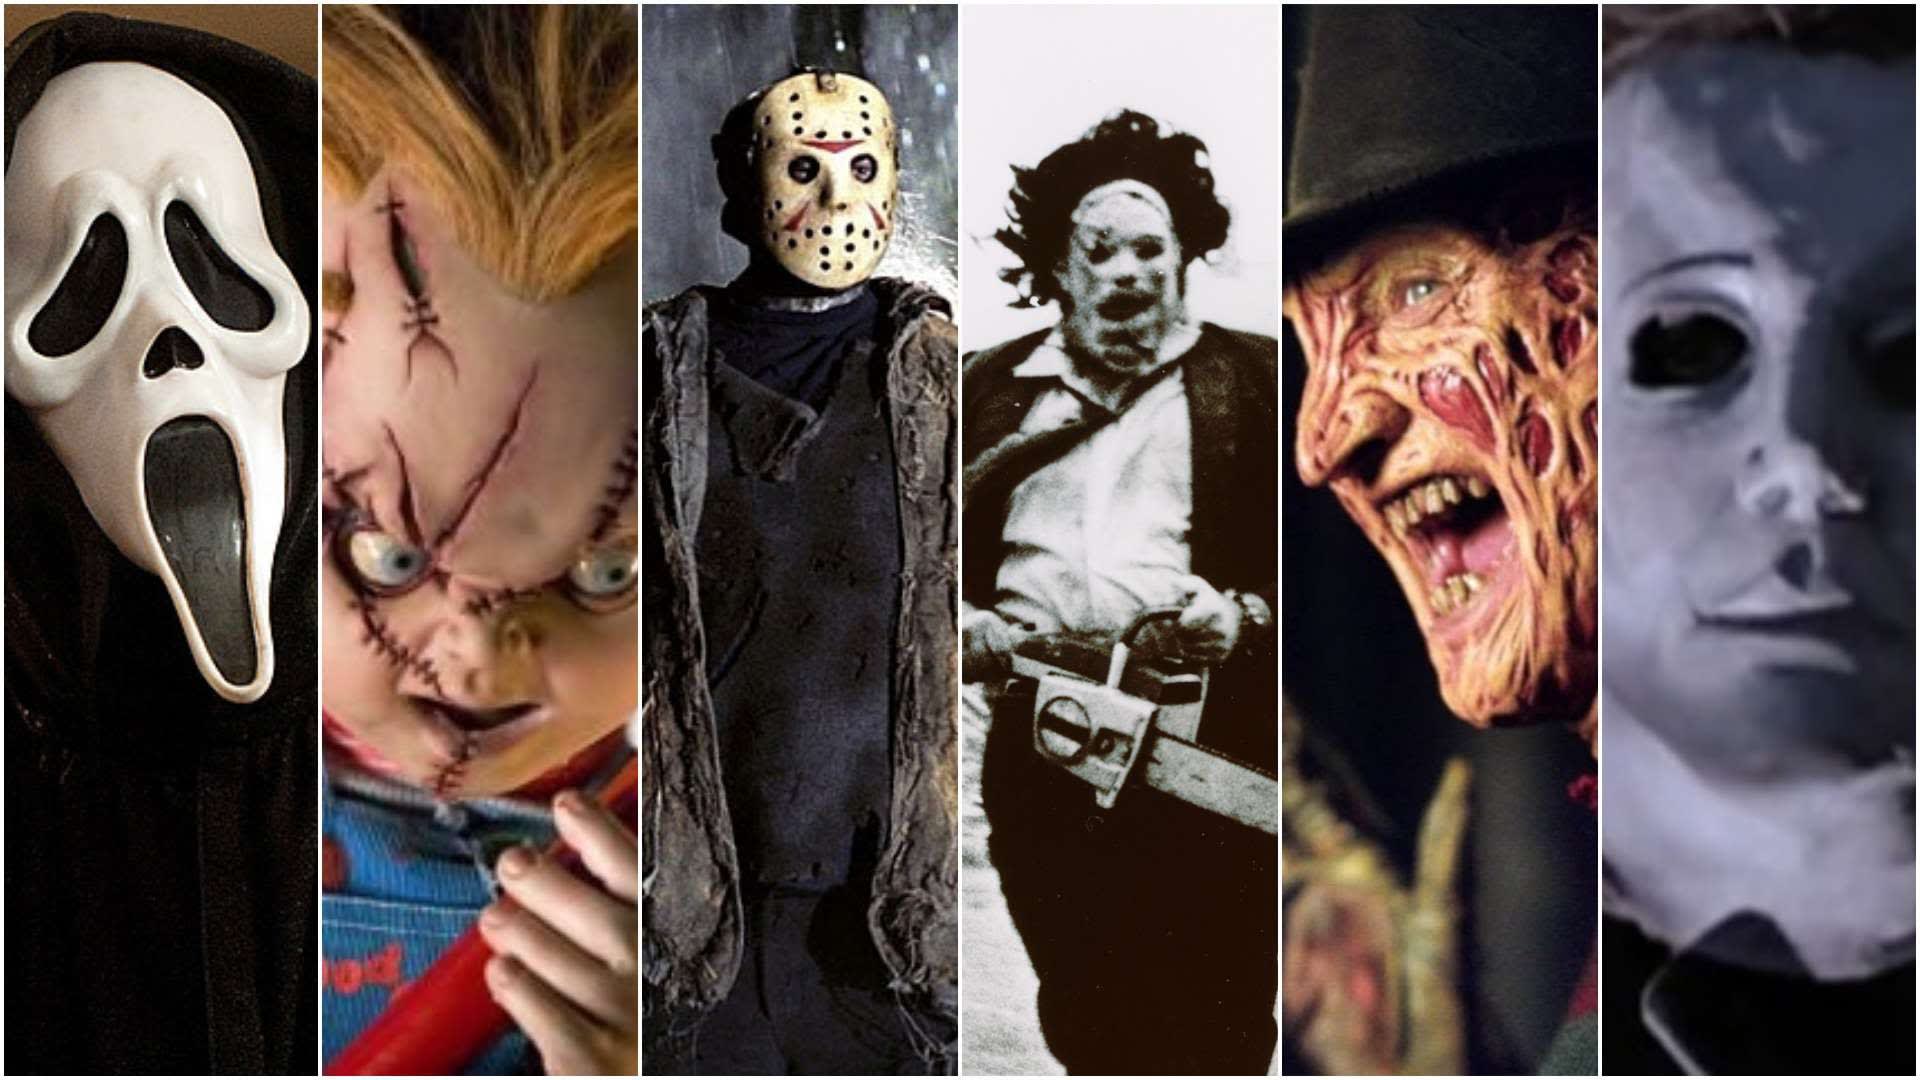 Horror Movie Collage Wallpapers.